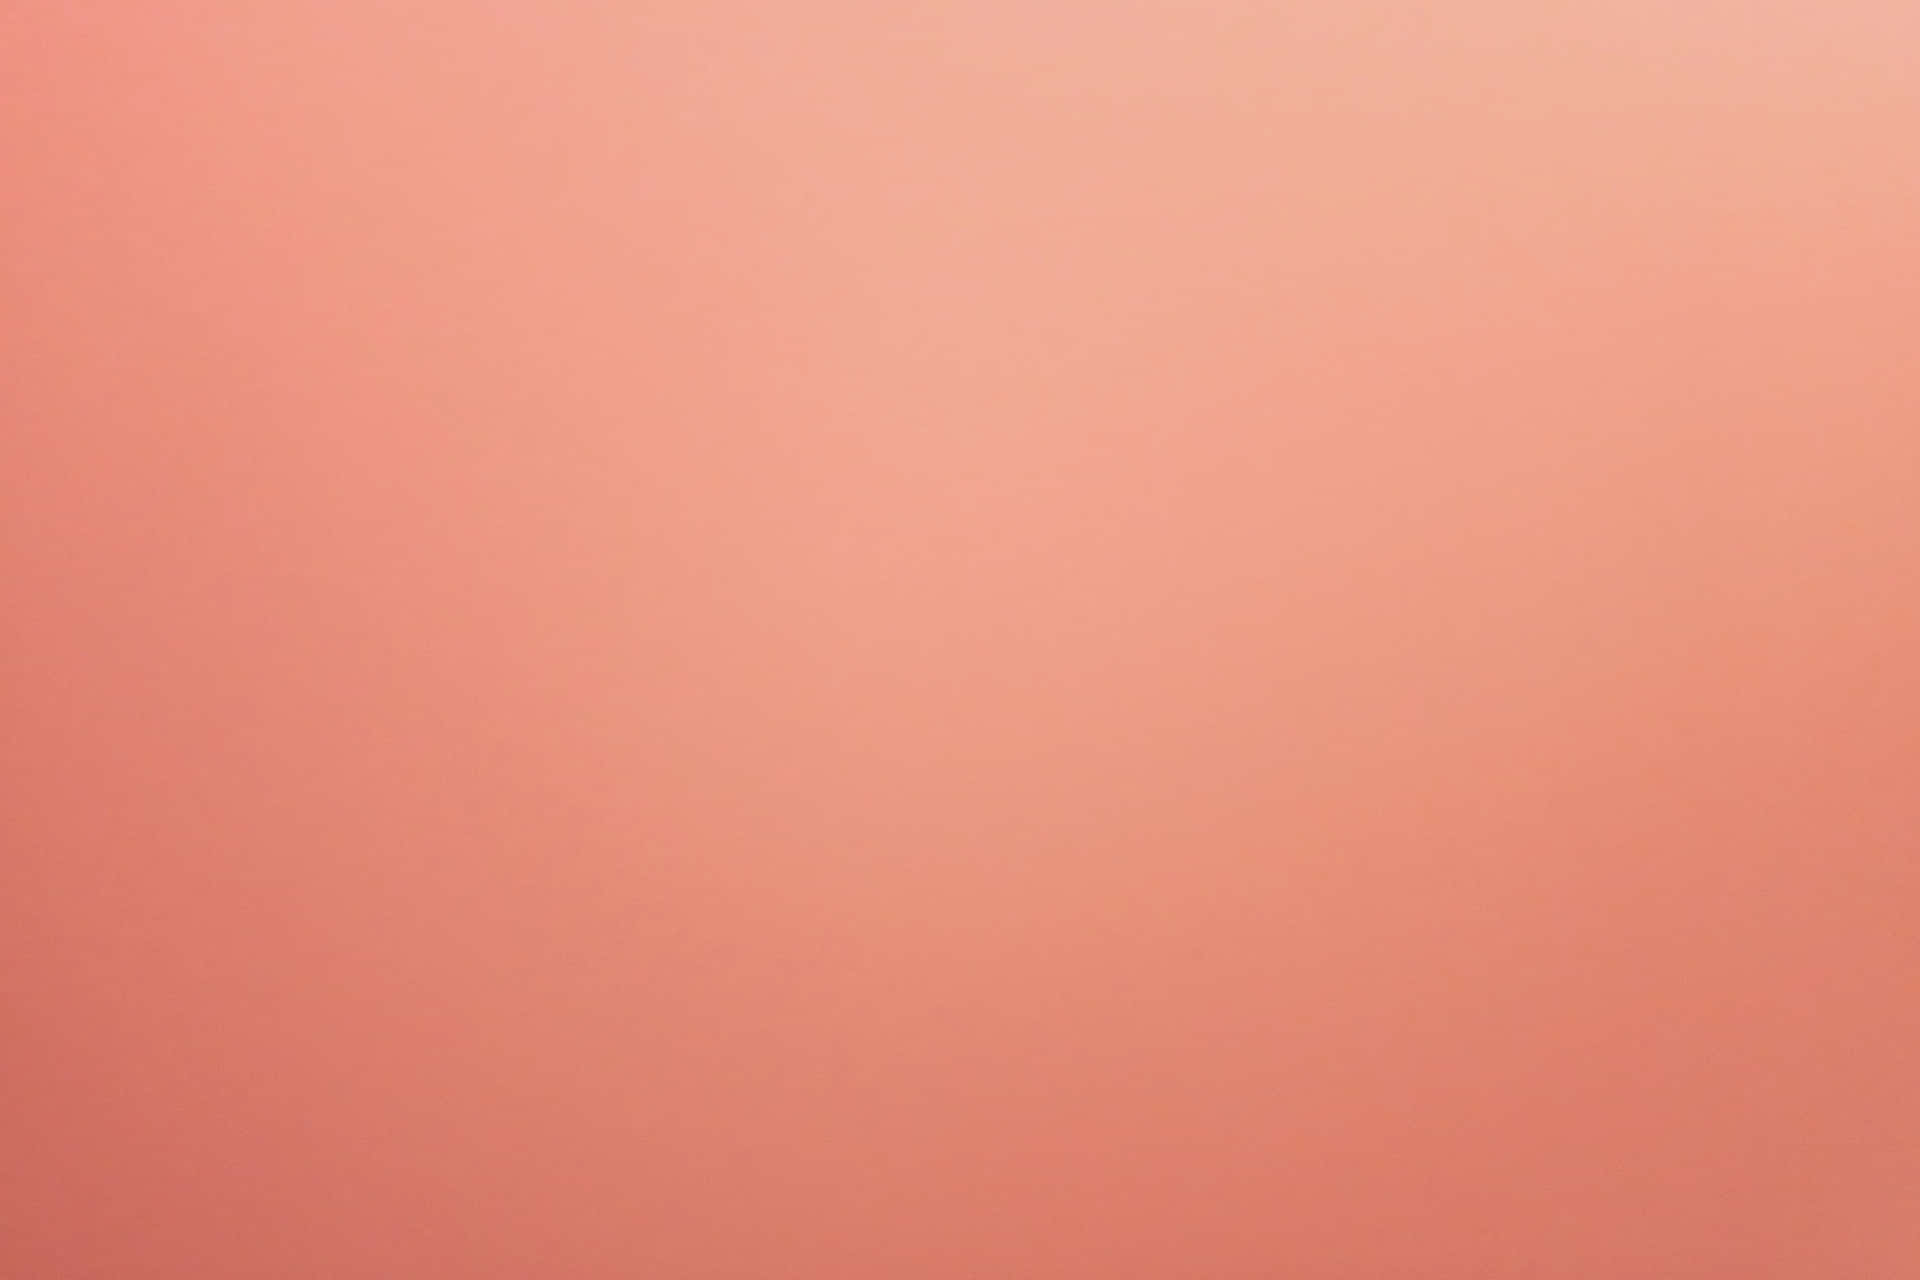 Solid Peach Color Background